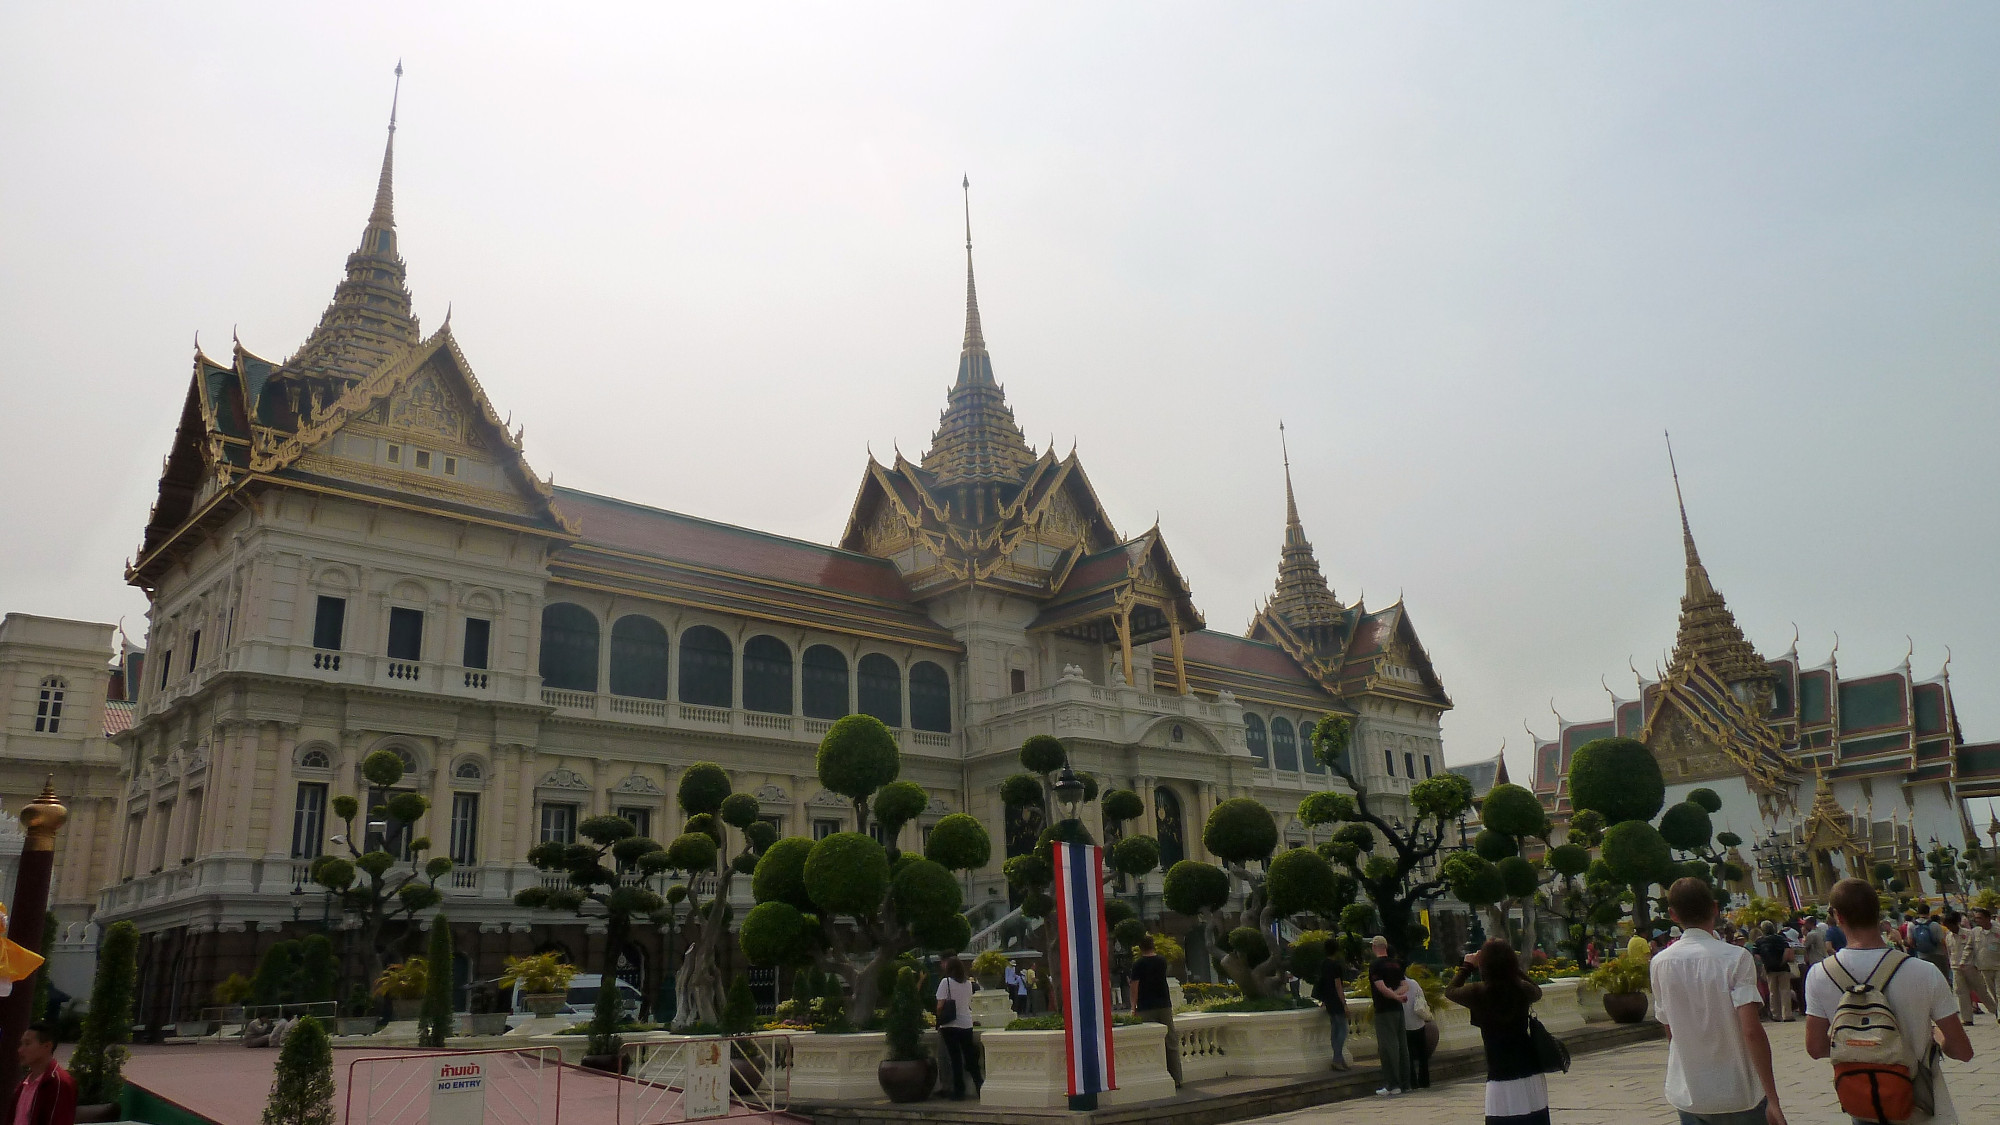 The Grand Palace, Thailand